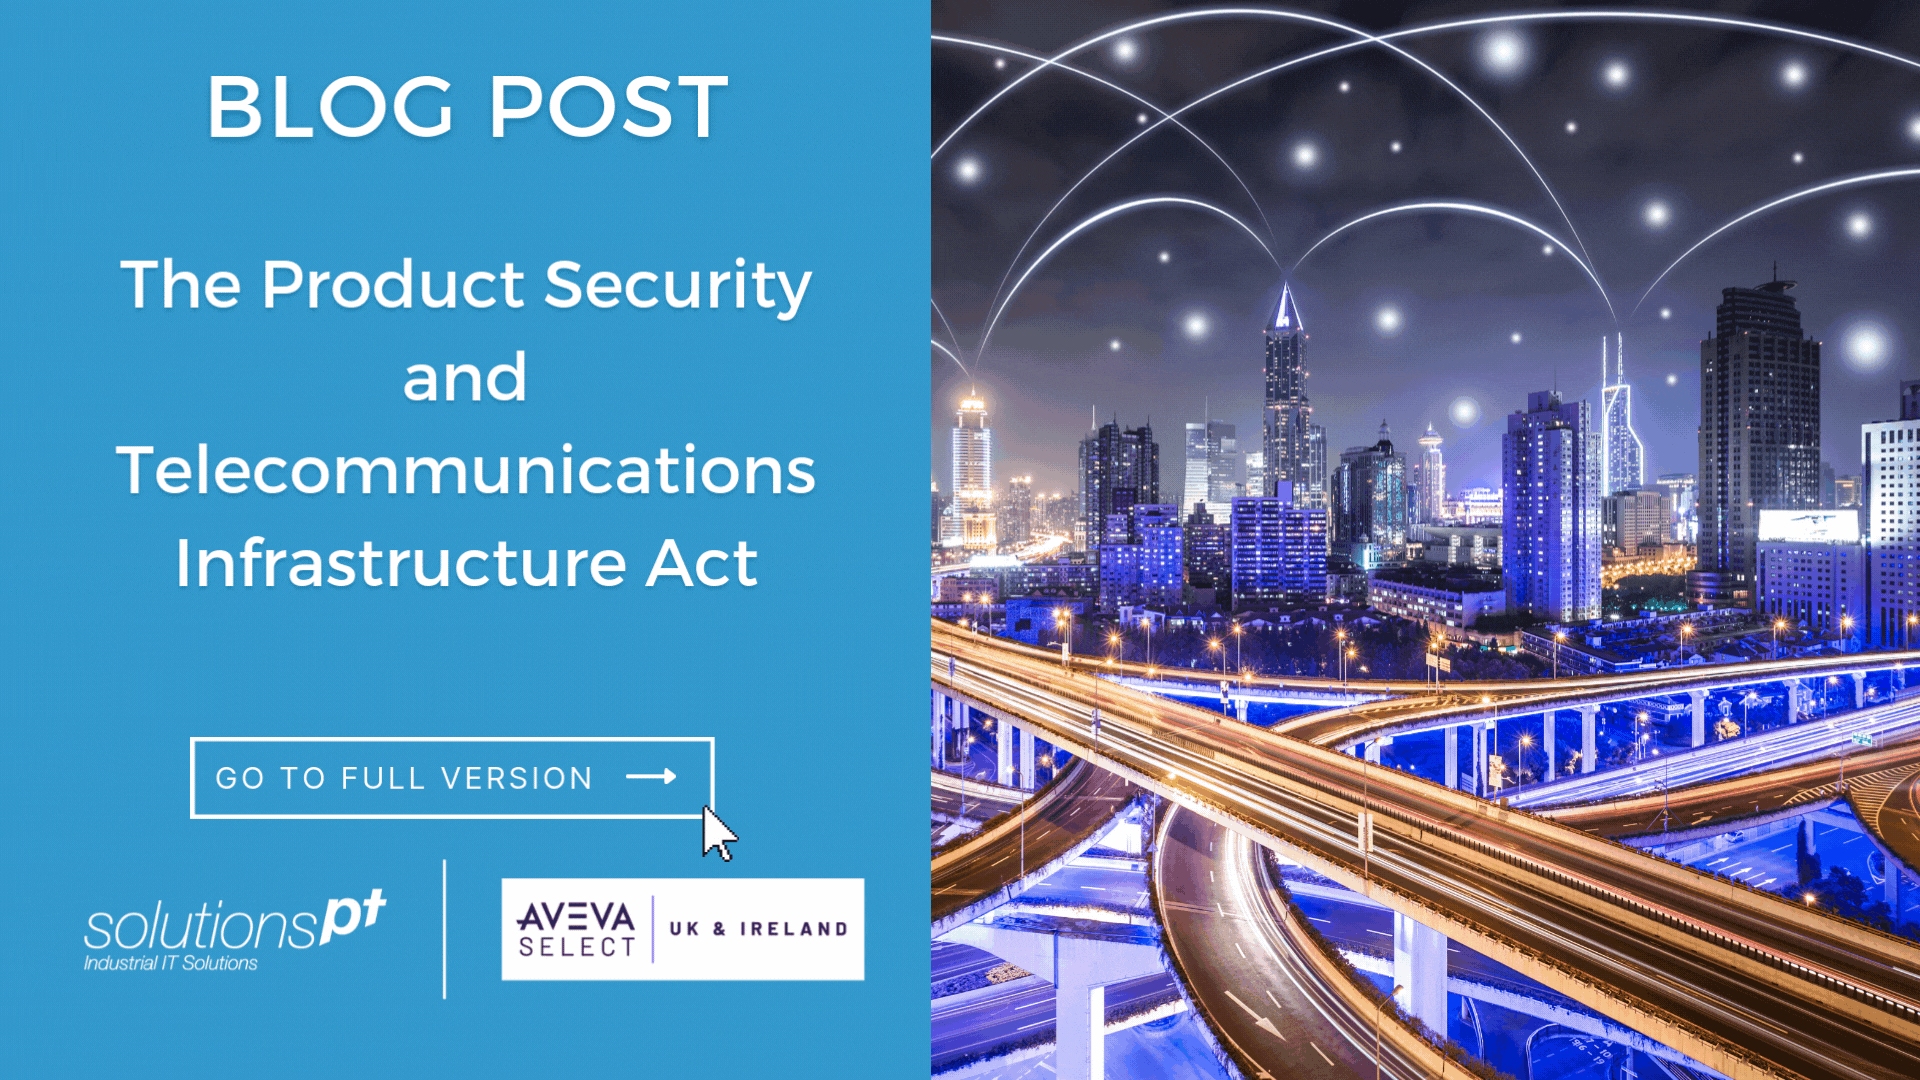 The Product Security and Telecommunications Infrastructure Act